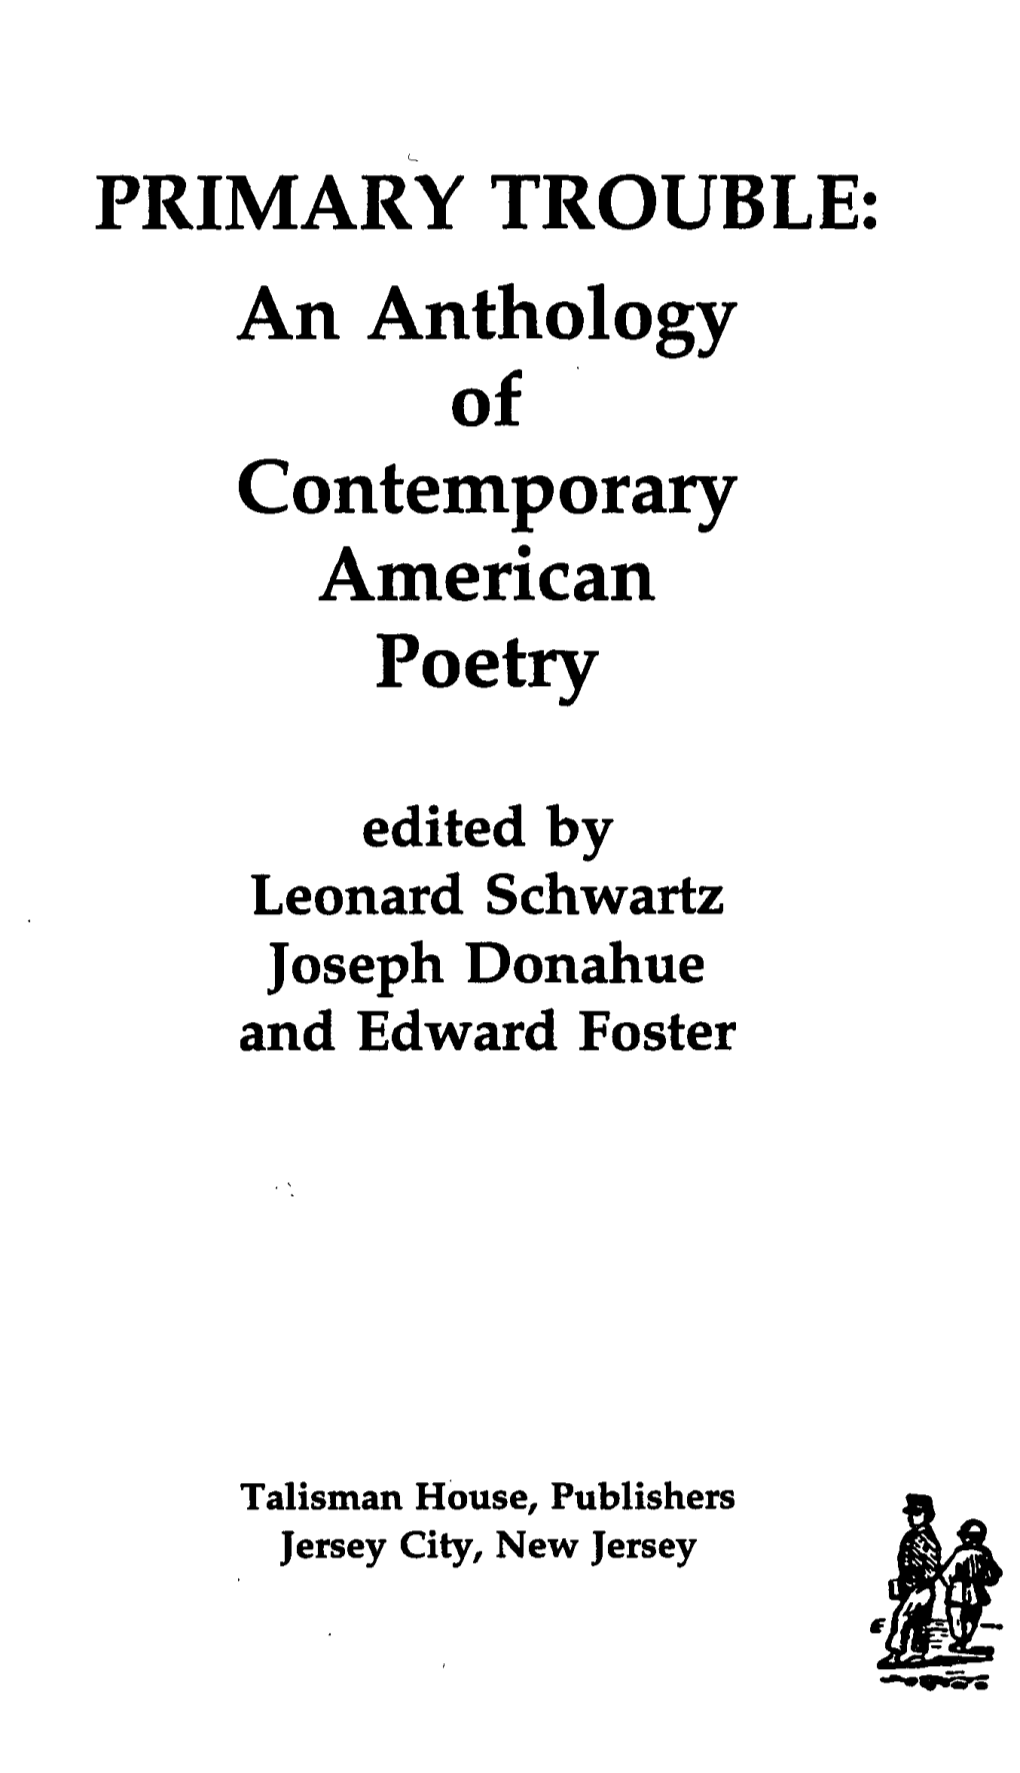 An Anthology of Contemporary American Poetry